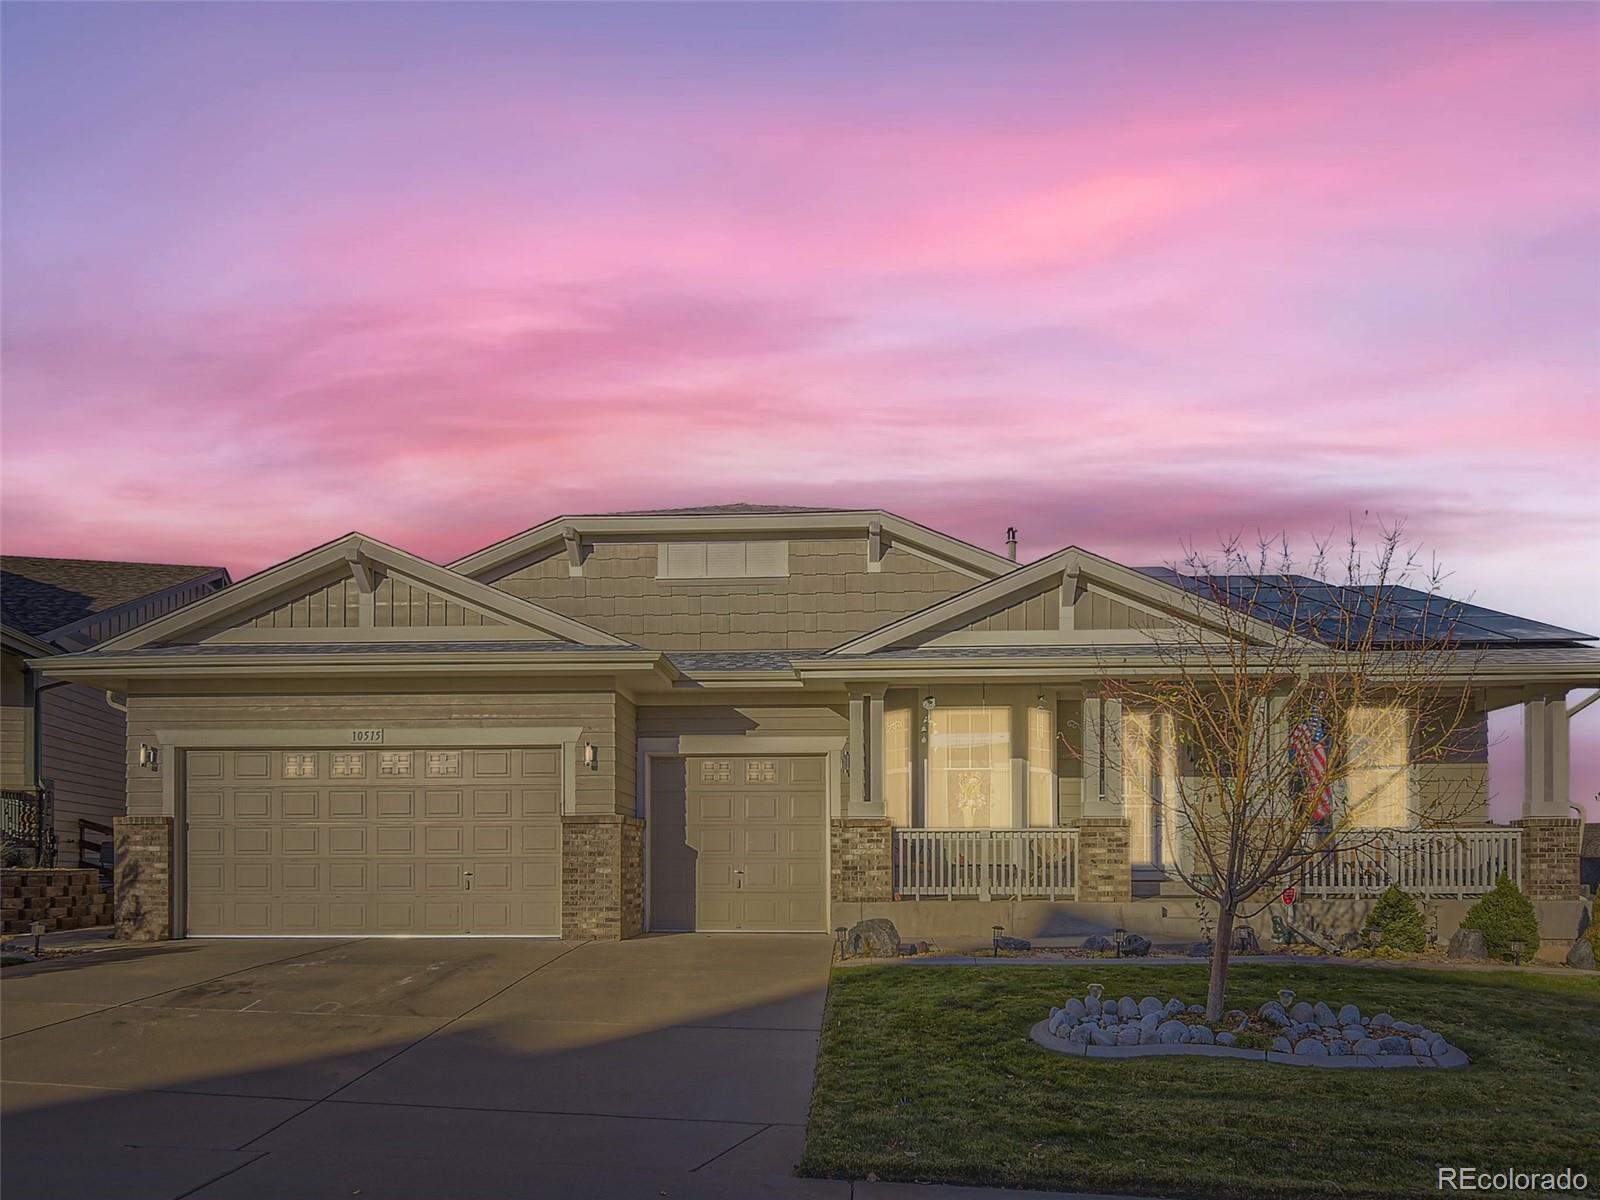 10515  cross country lane, Littleton sold home. Closed on 2024-01-26 for $854,900.